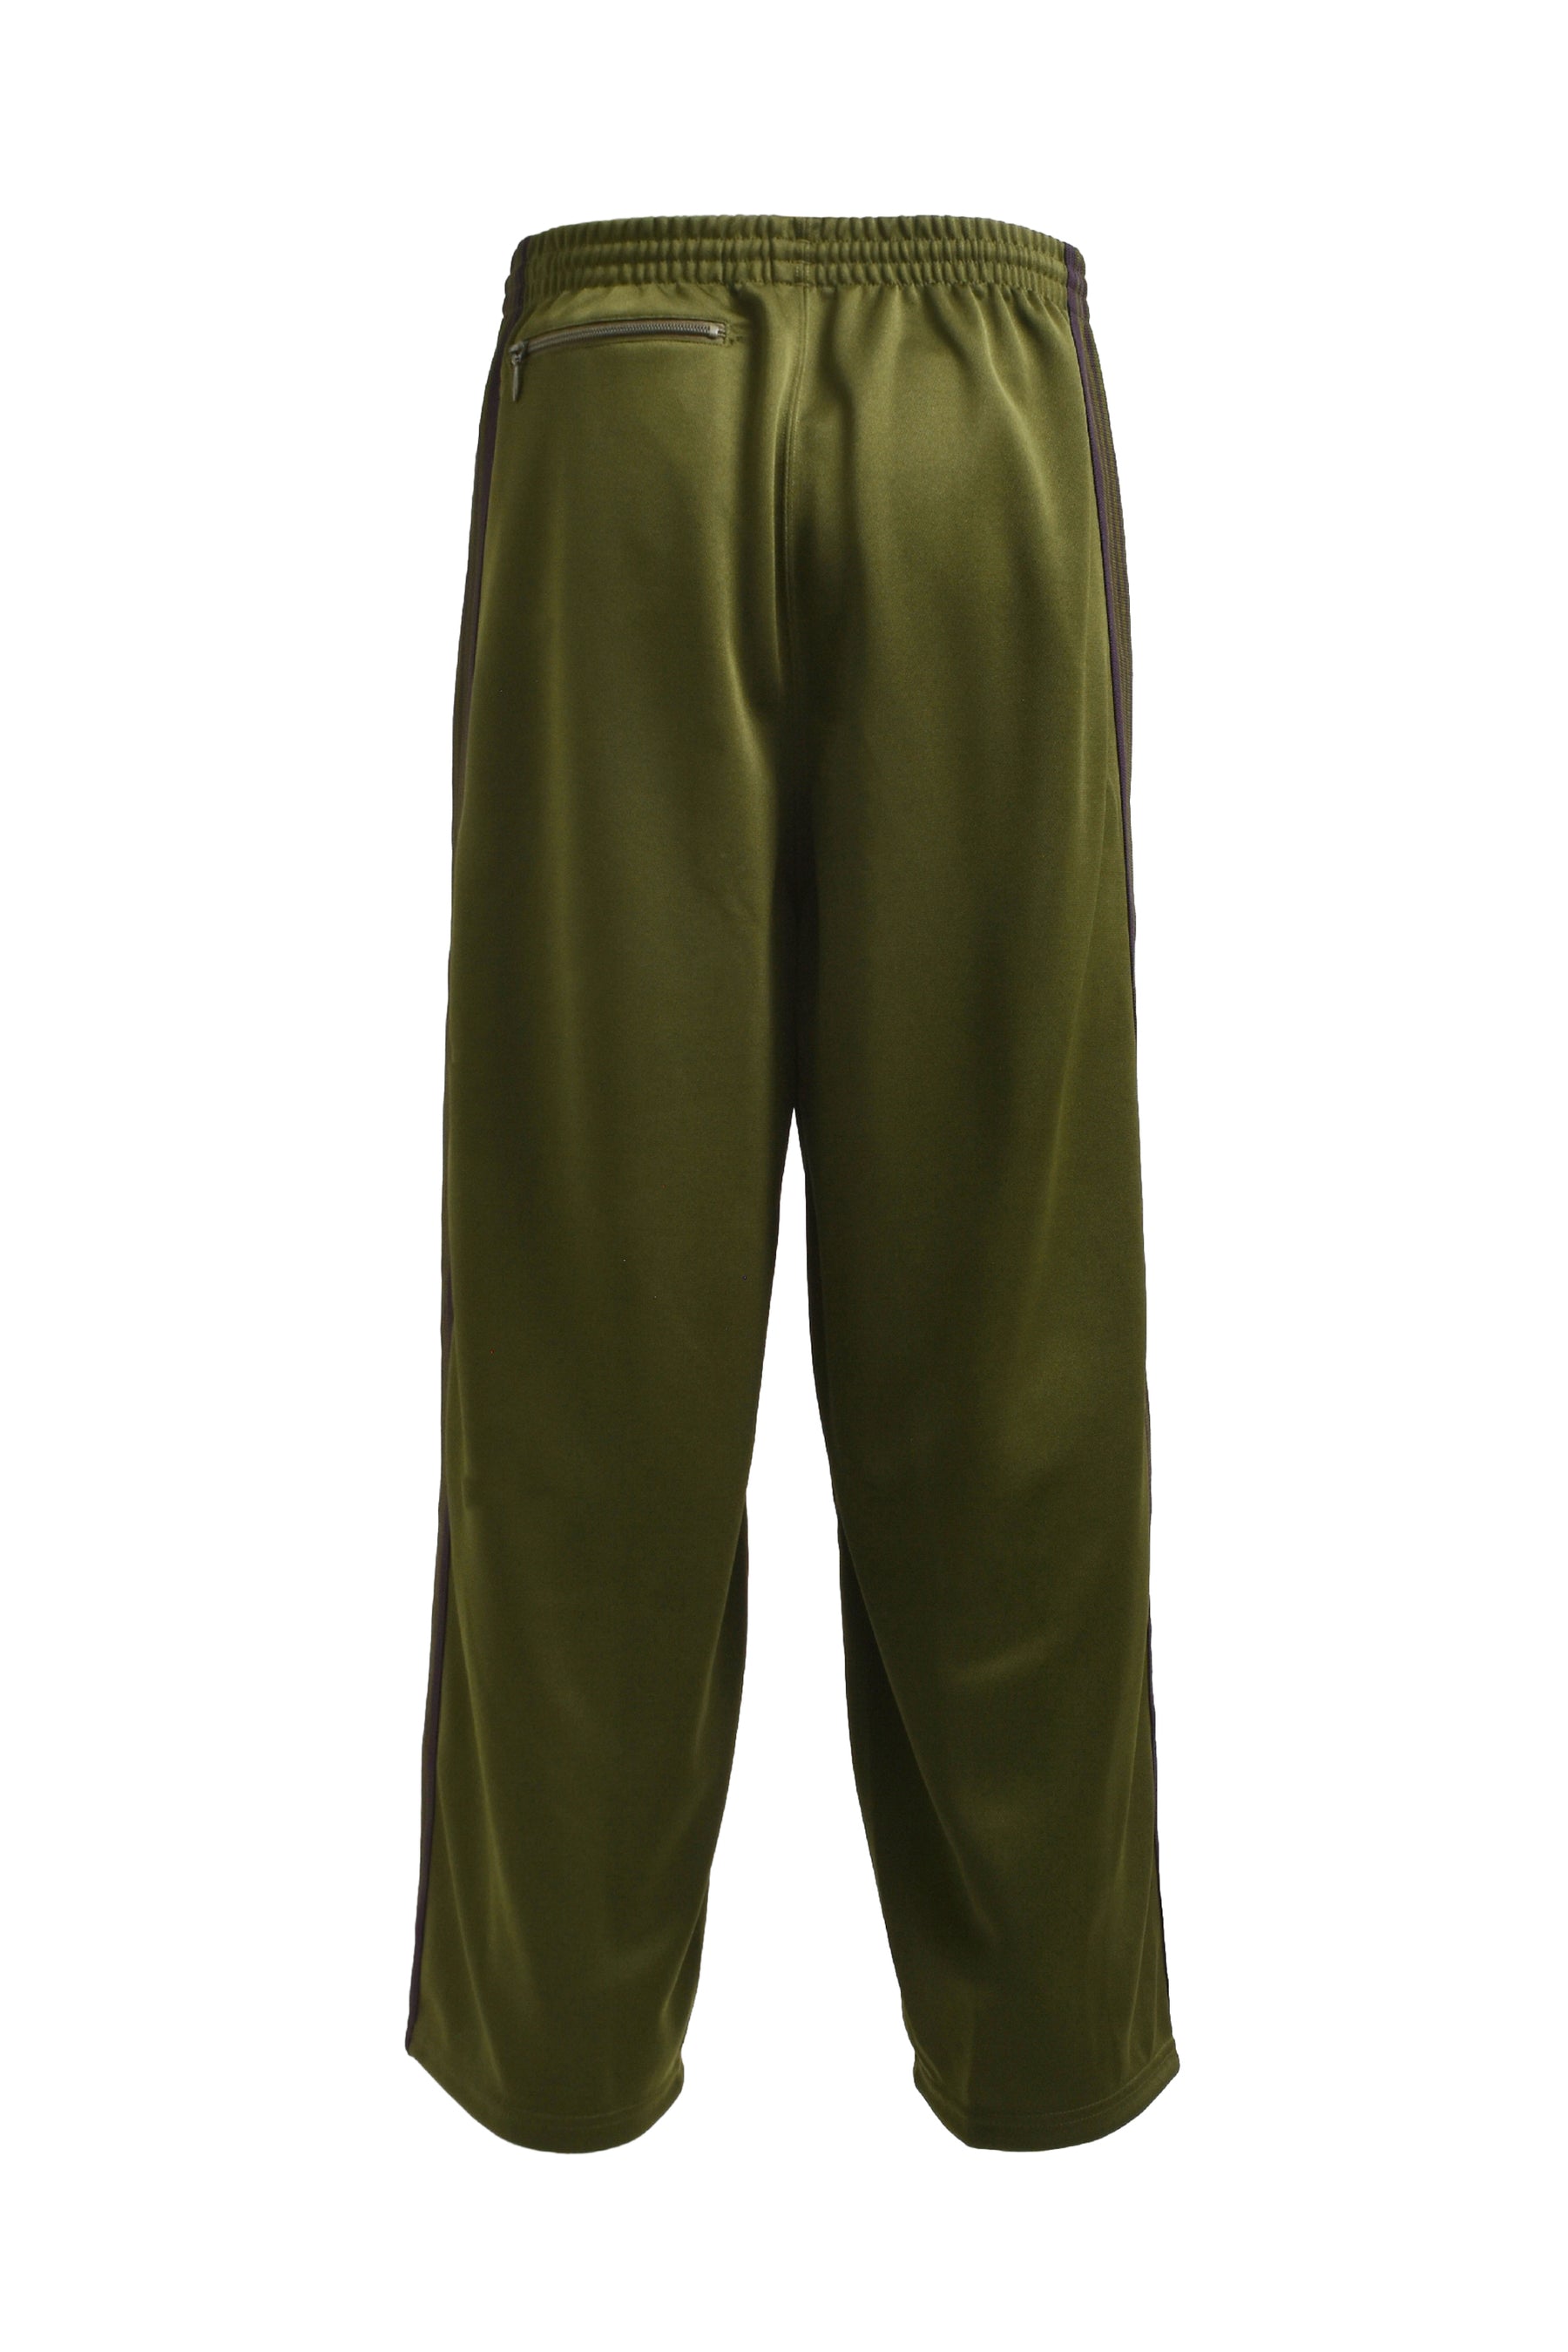 H.D. TRACK PANT - POLY SMOOTH / OLV